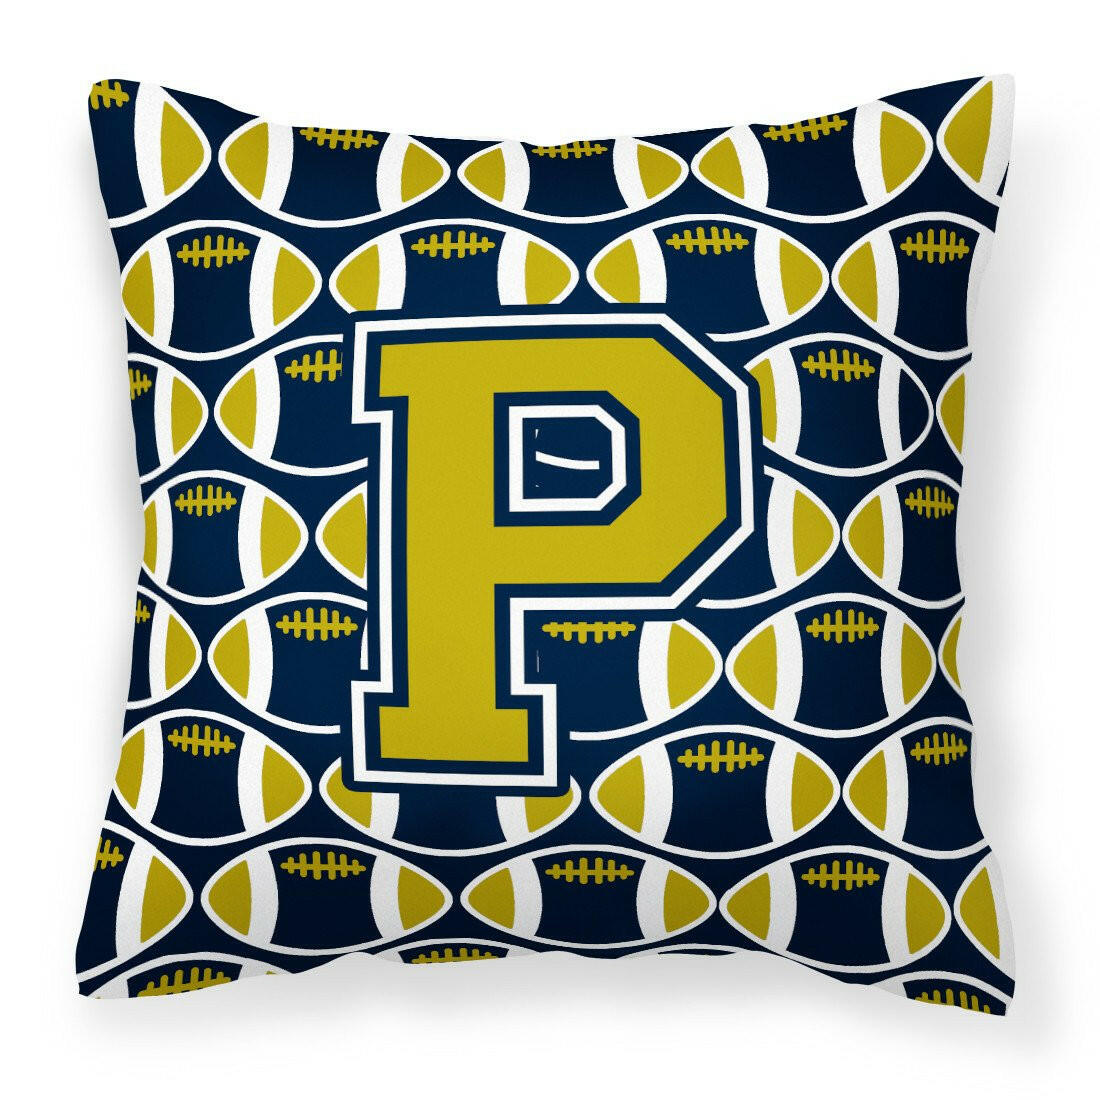 Letter P Football Blue and Gold Fabric Decorative Pillow CJ1074-PPW1414 by Caroline's Treasures